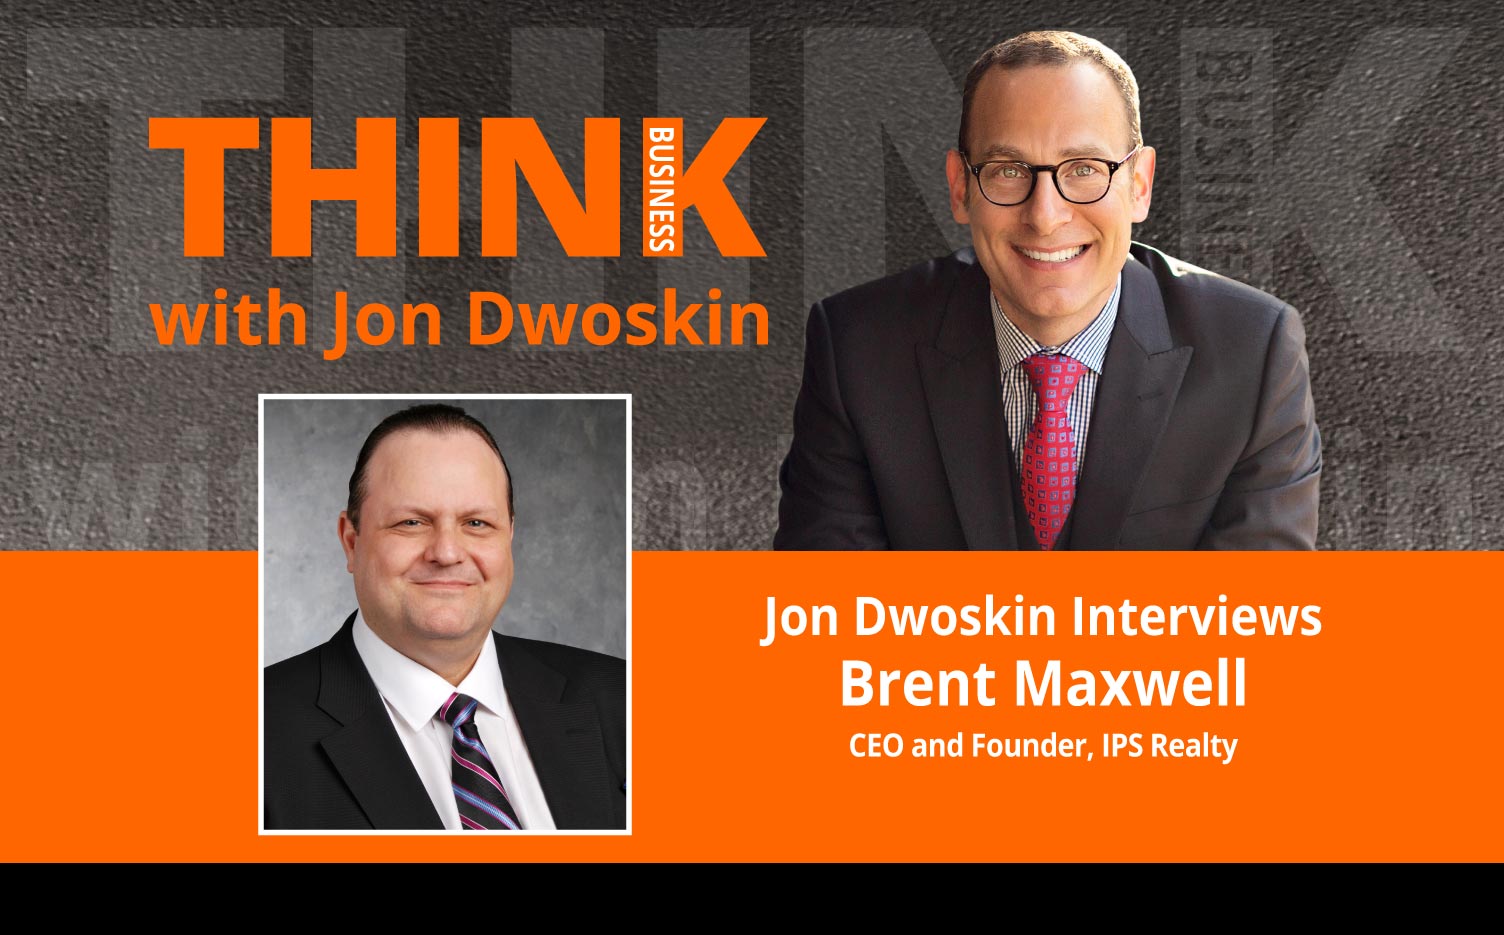 Jon Dwoskin Interviews Brent Maxwell, CEO and Founder, IPS Realty